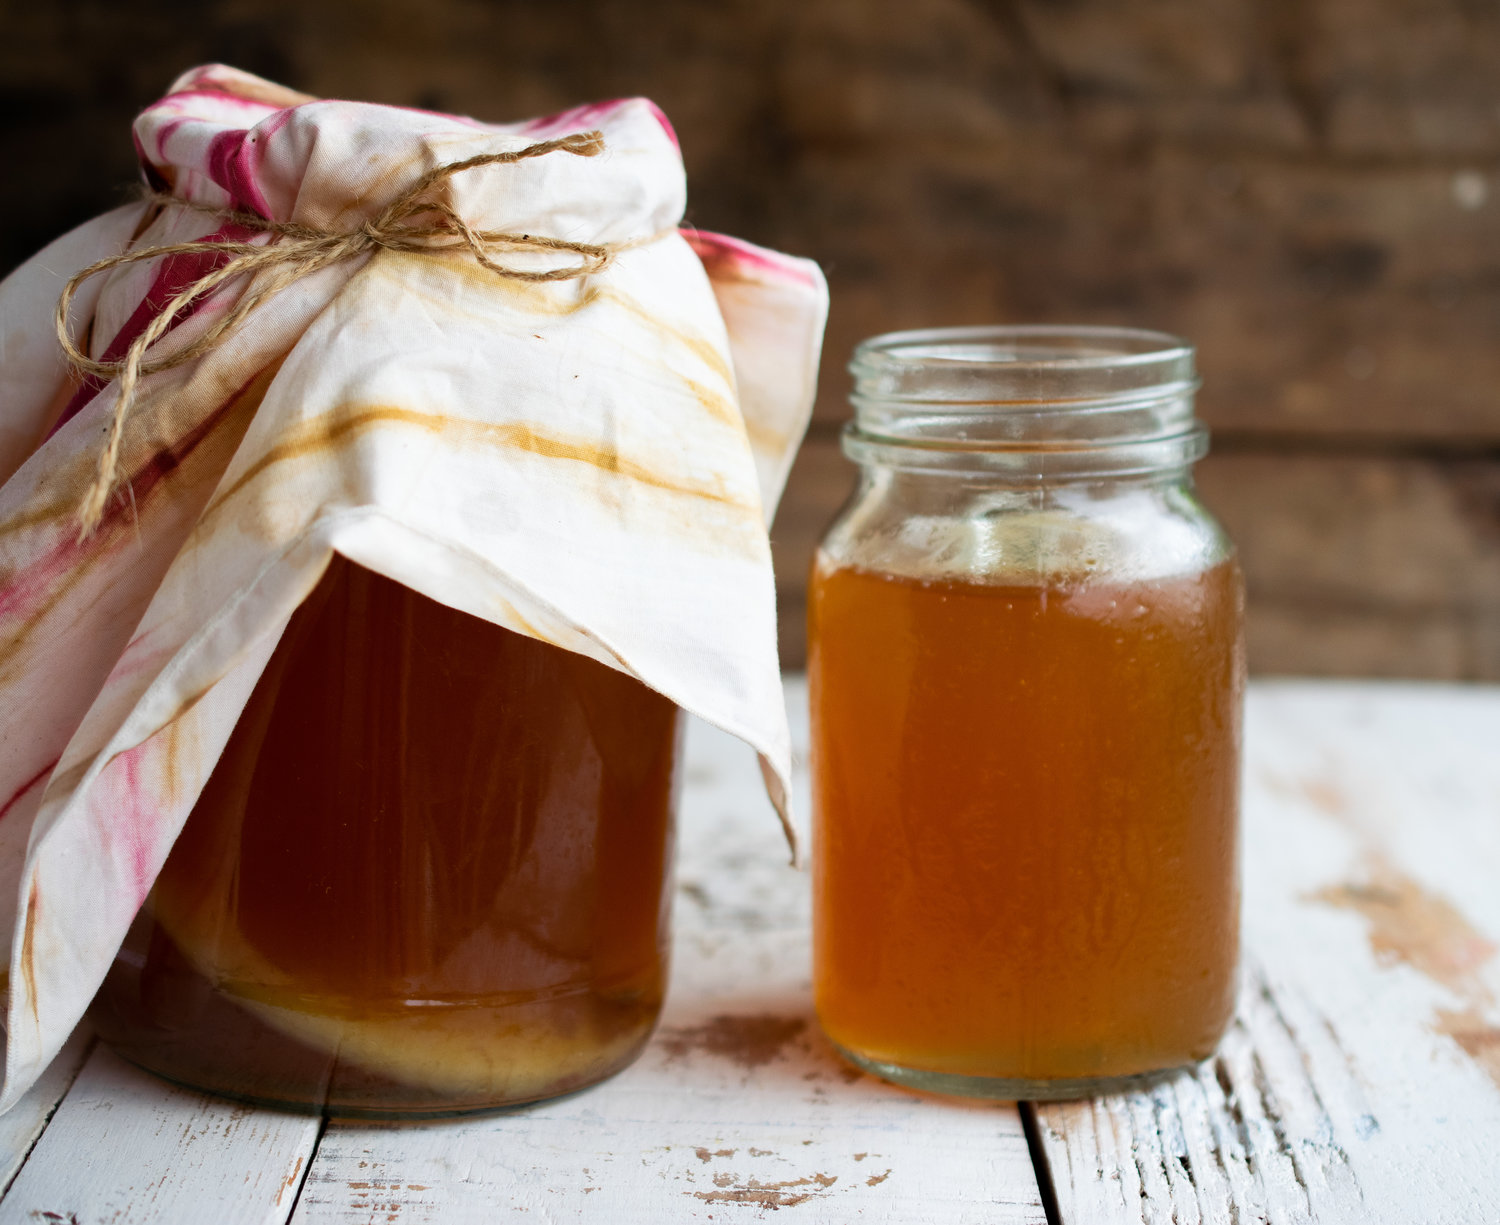 How To Store Scoby While On Vacation